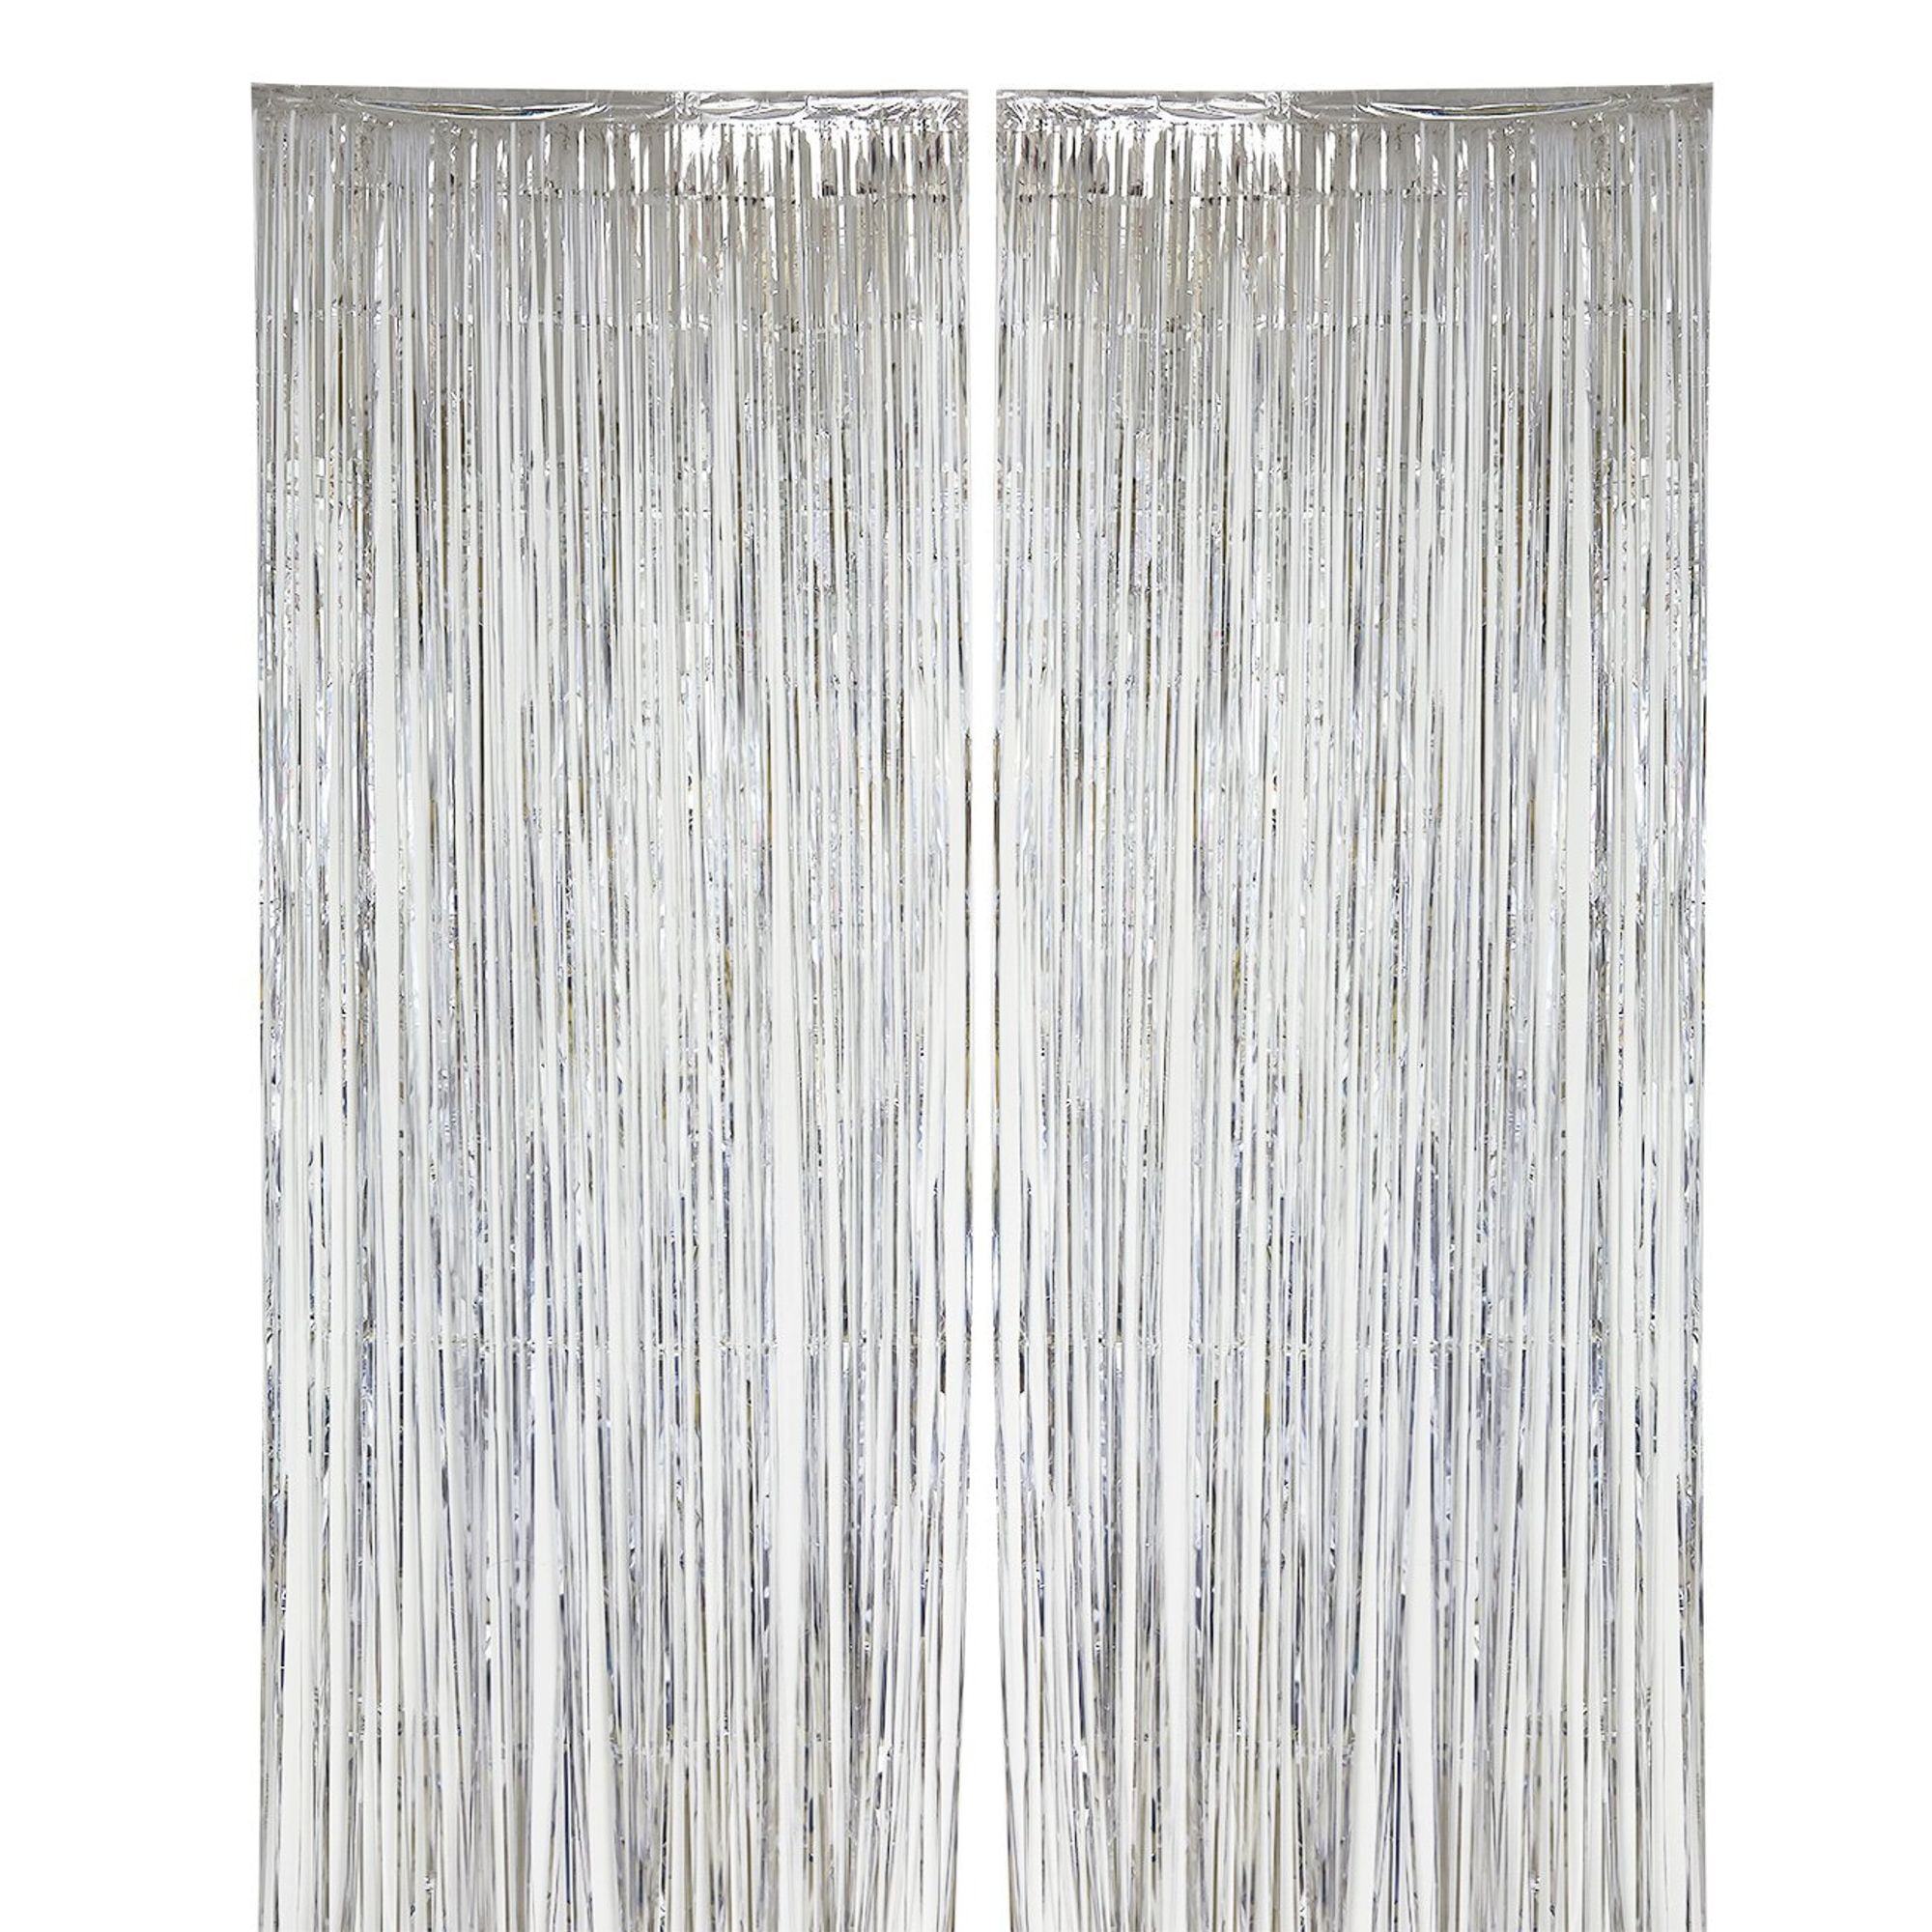 Foil Fringe Curtains Photo Booth Tinsel Door Backdrop Party Decor-TOPY 